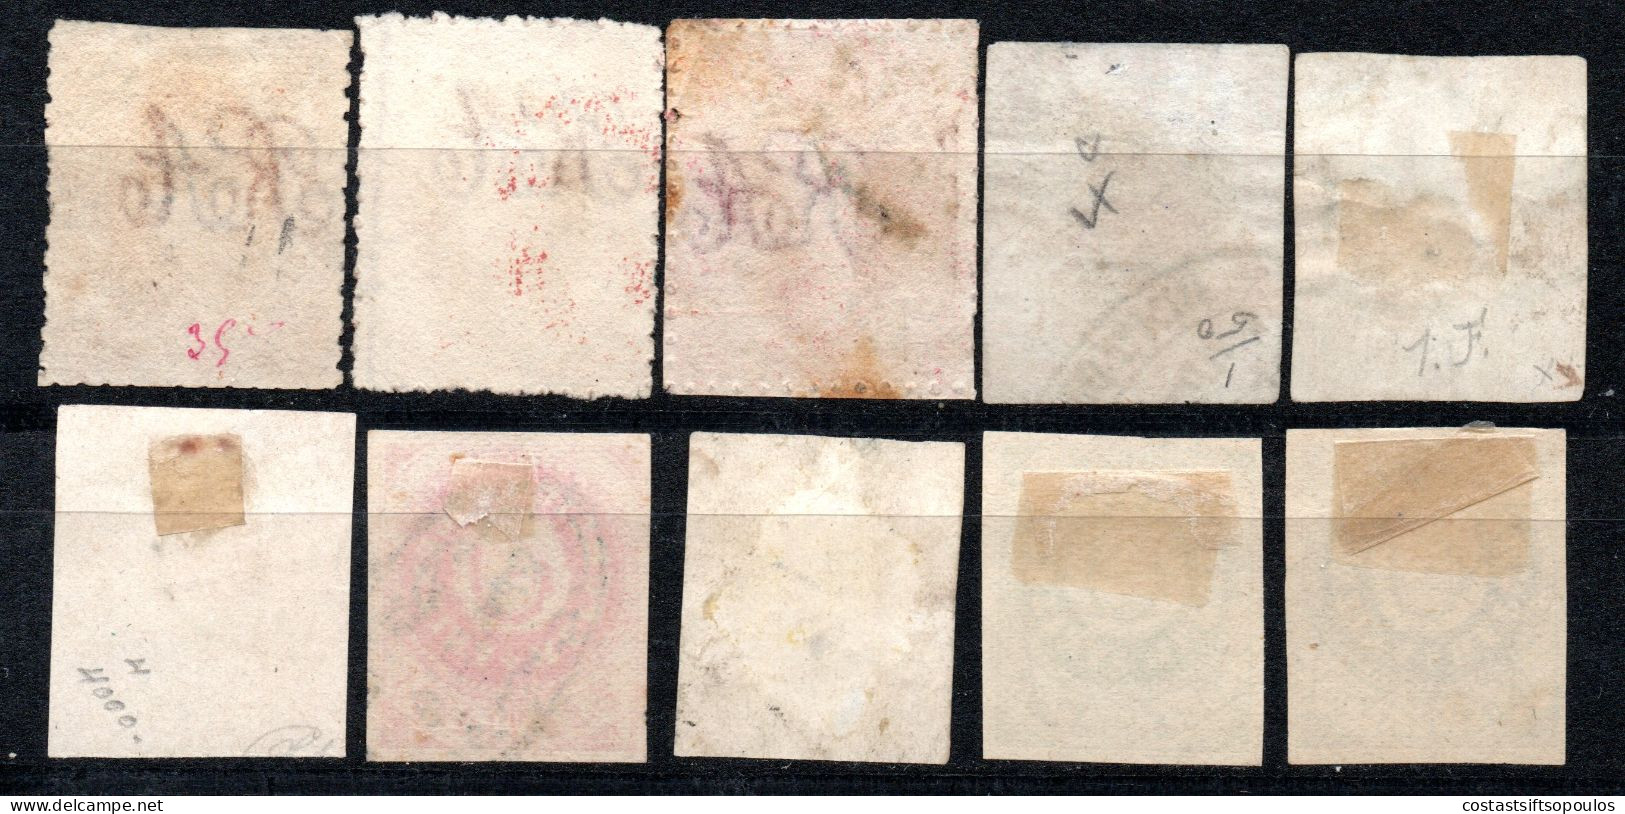 3222.1858-1867 10 CLASSIC STAMPS LOT, FEW FAULTS - Collections, Lots & Séries